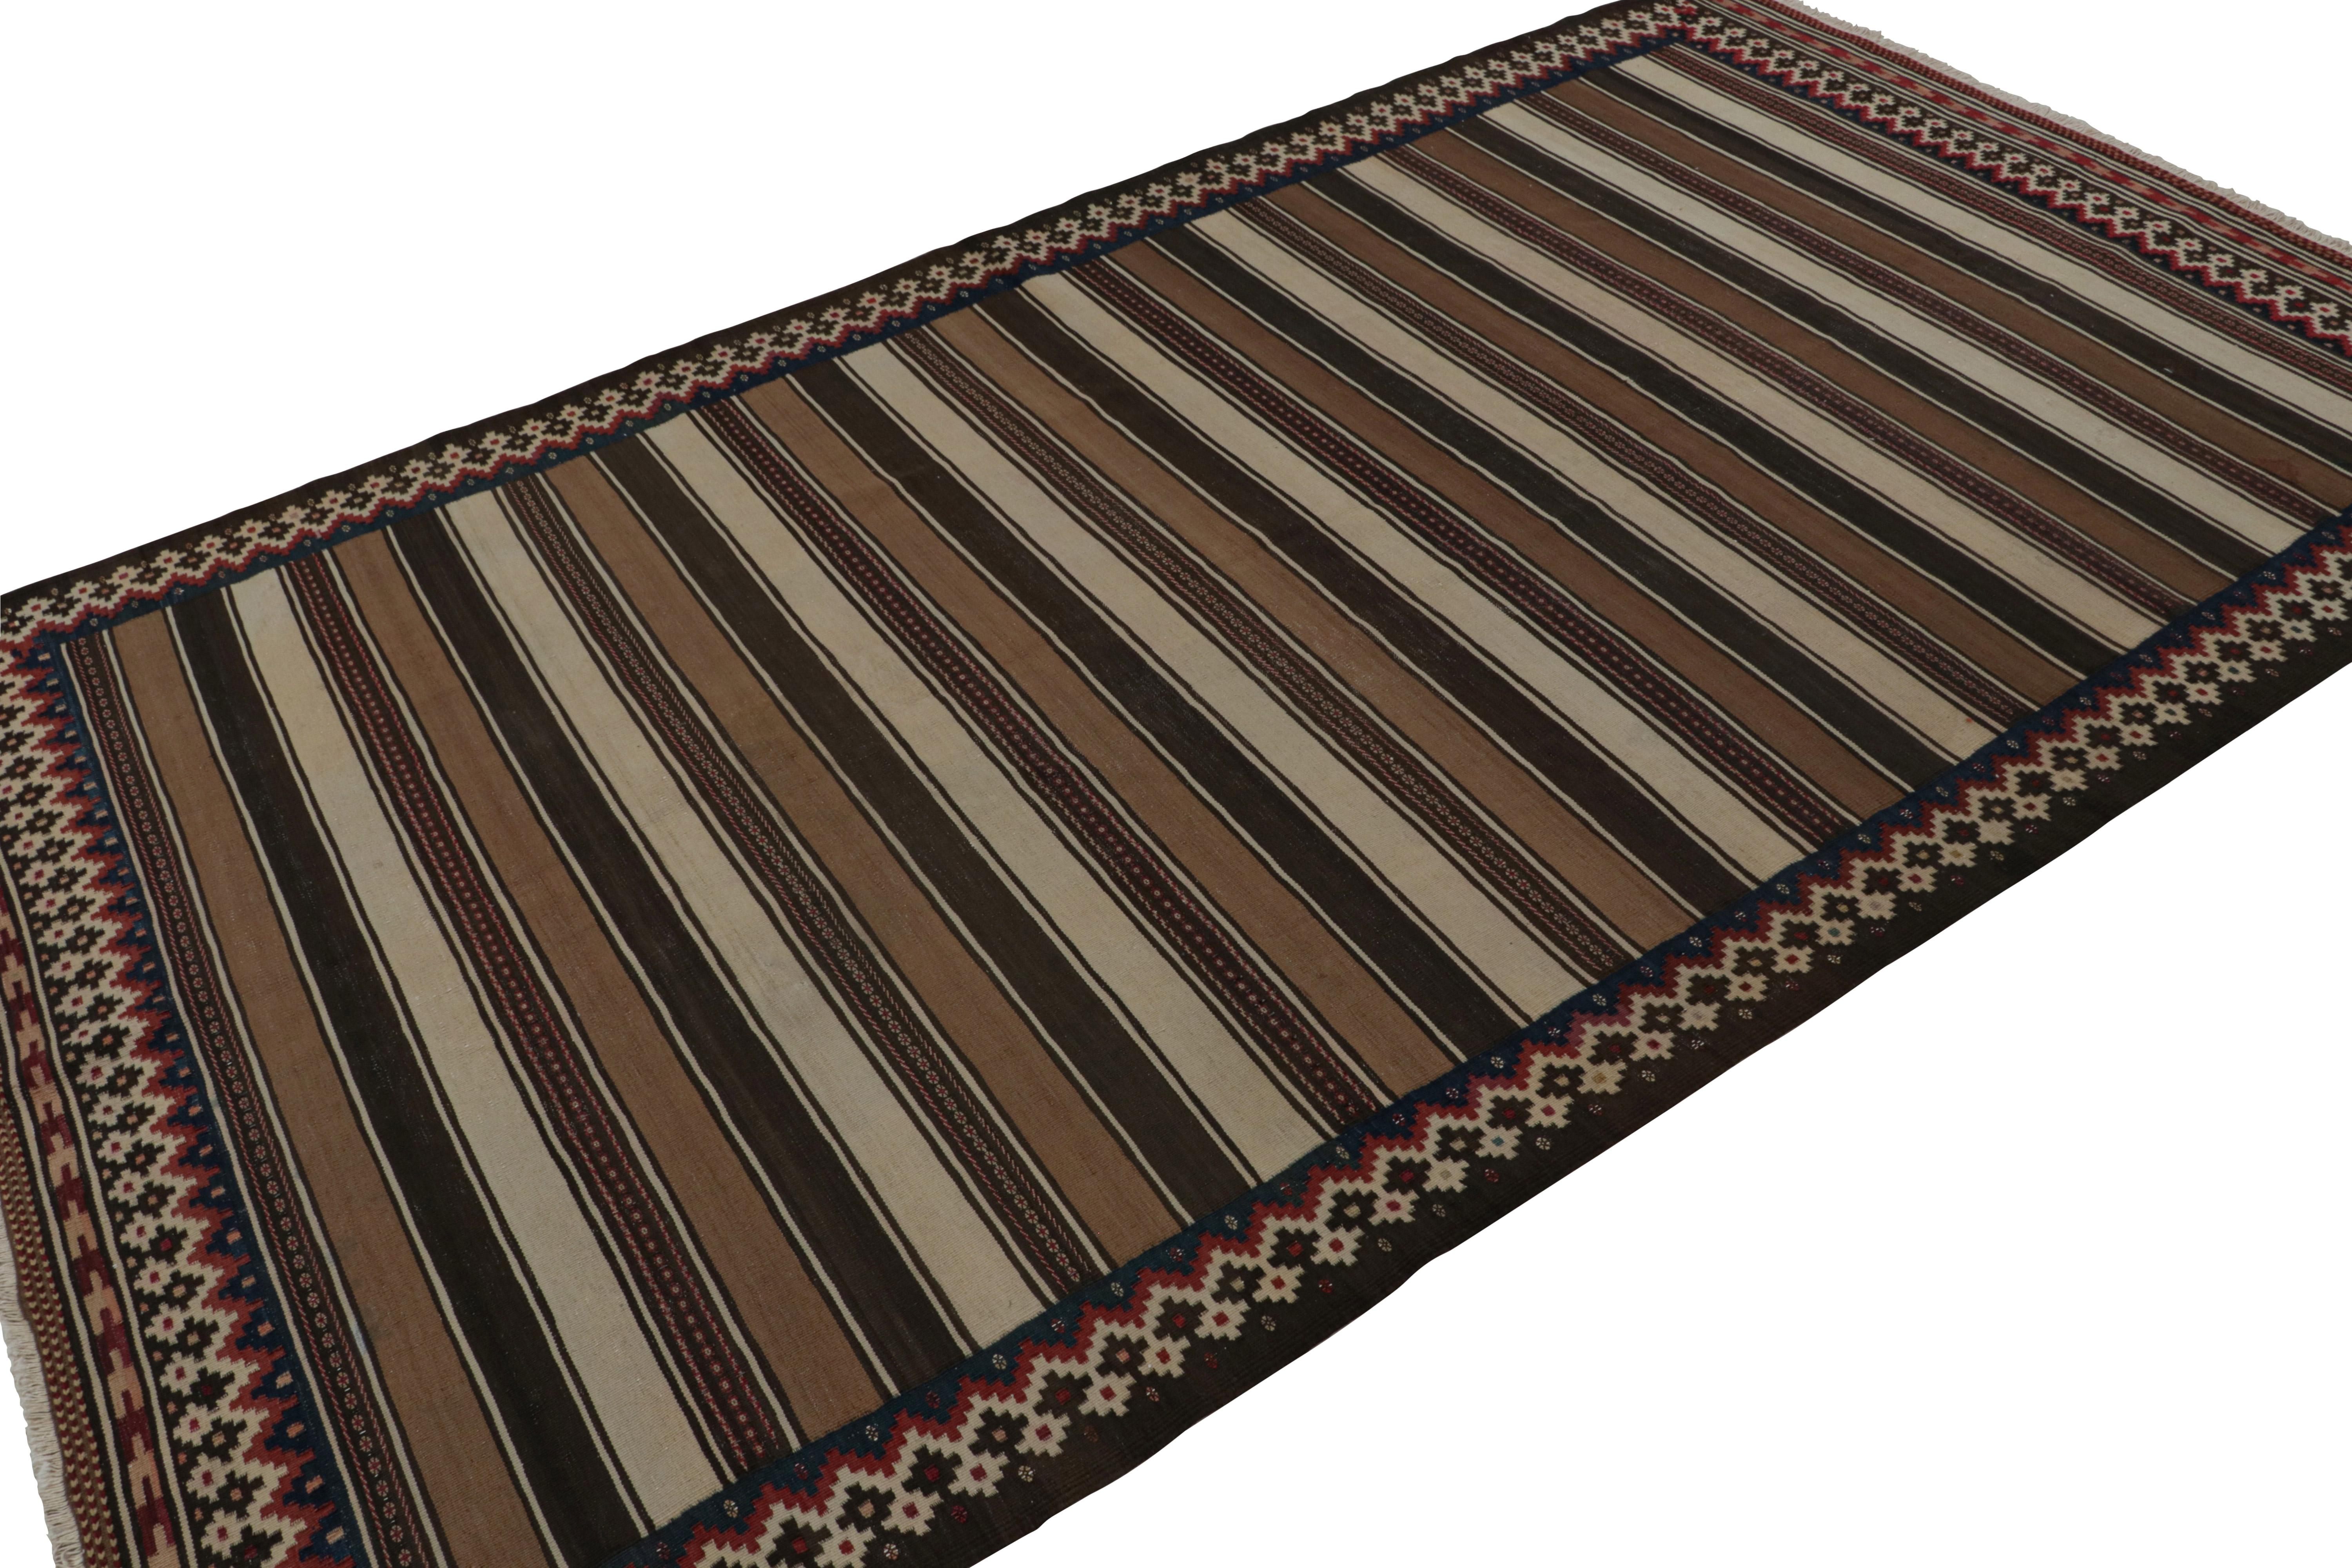 Handwoven in wool, circa 1950-1960, this 6x10 vintage Afghan tribal kilim, in beige/brown, features fencepost geometric patterns across the entire field. 

On the Design: 

As an exciting new curation in Rug & Kilim Collection, this rug in